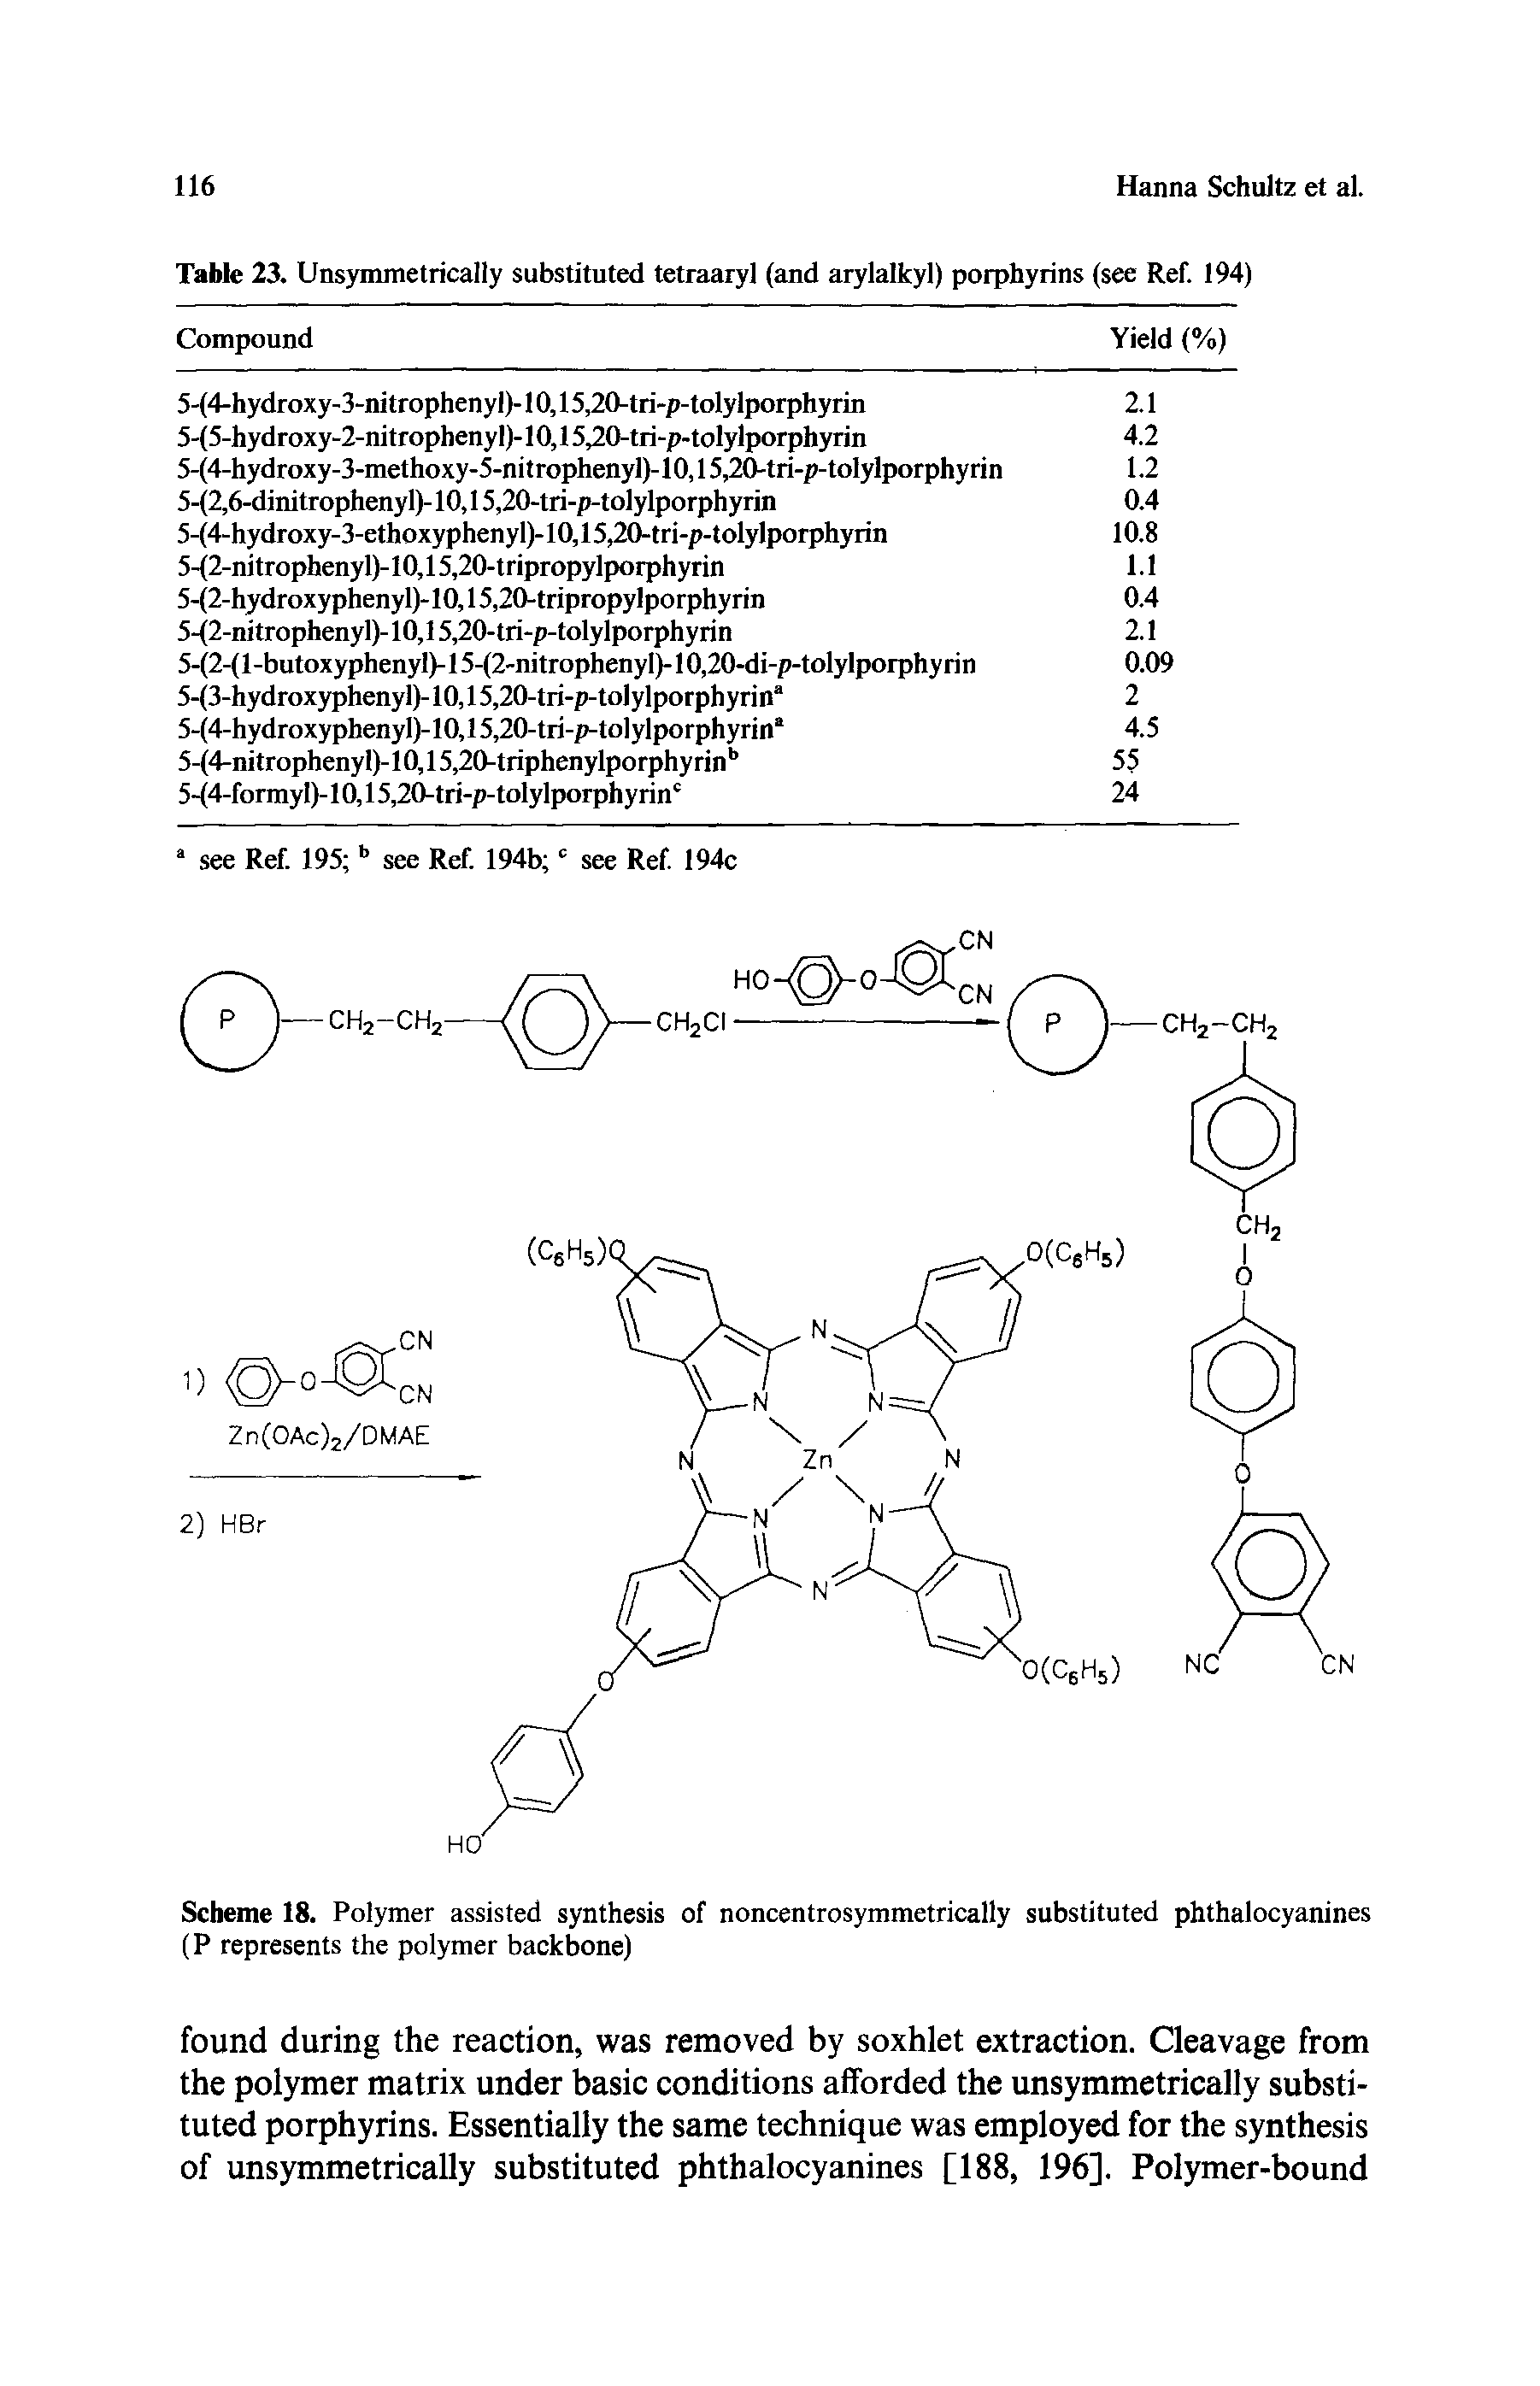 Table 23. Unsymmetrically substituted tetraaryl (and arylalkyl) porphyrins (see Ref. 194)...